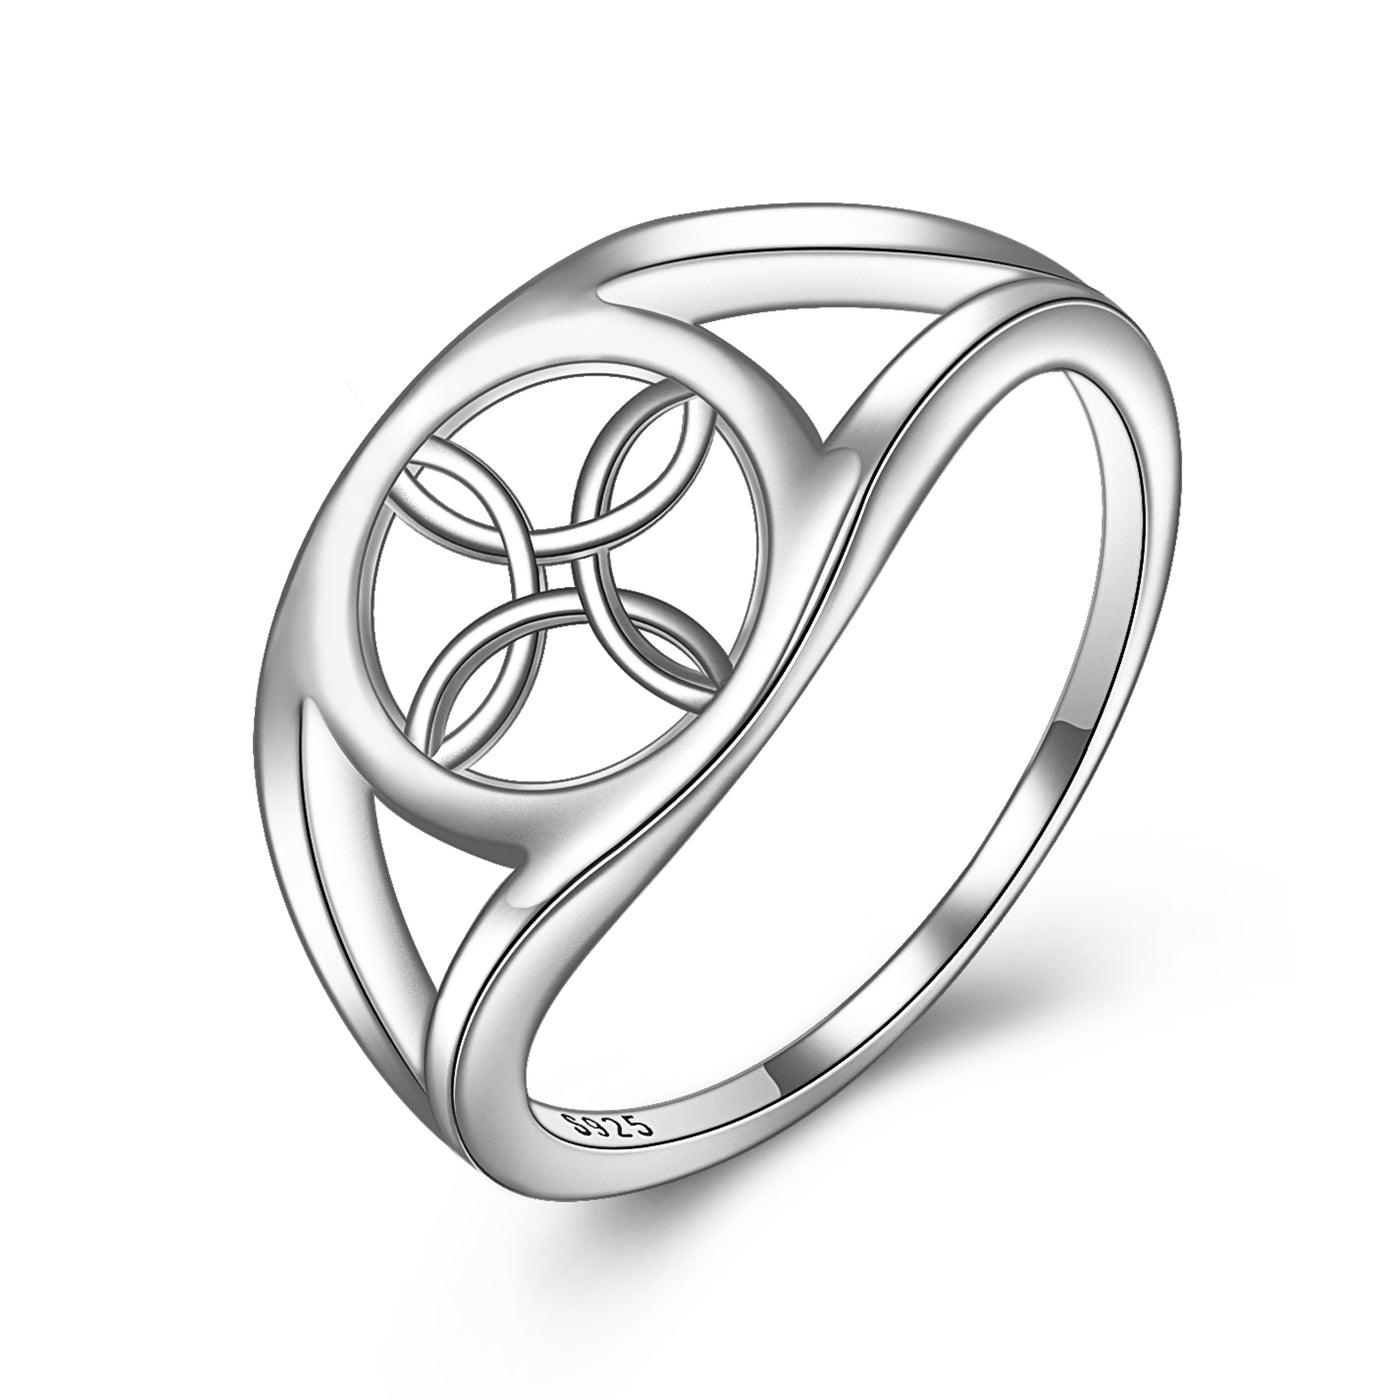 Sterling Sliver Celtic Circle Round Knot Rings - Dignitestore Ring